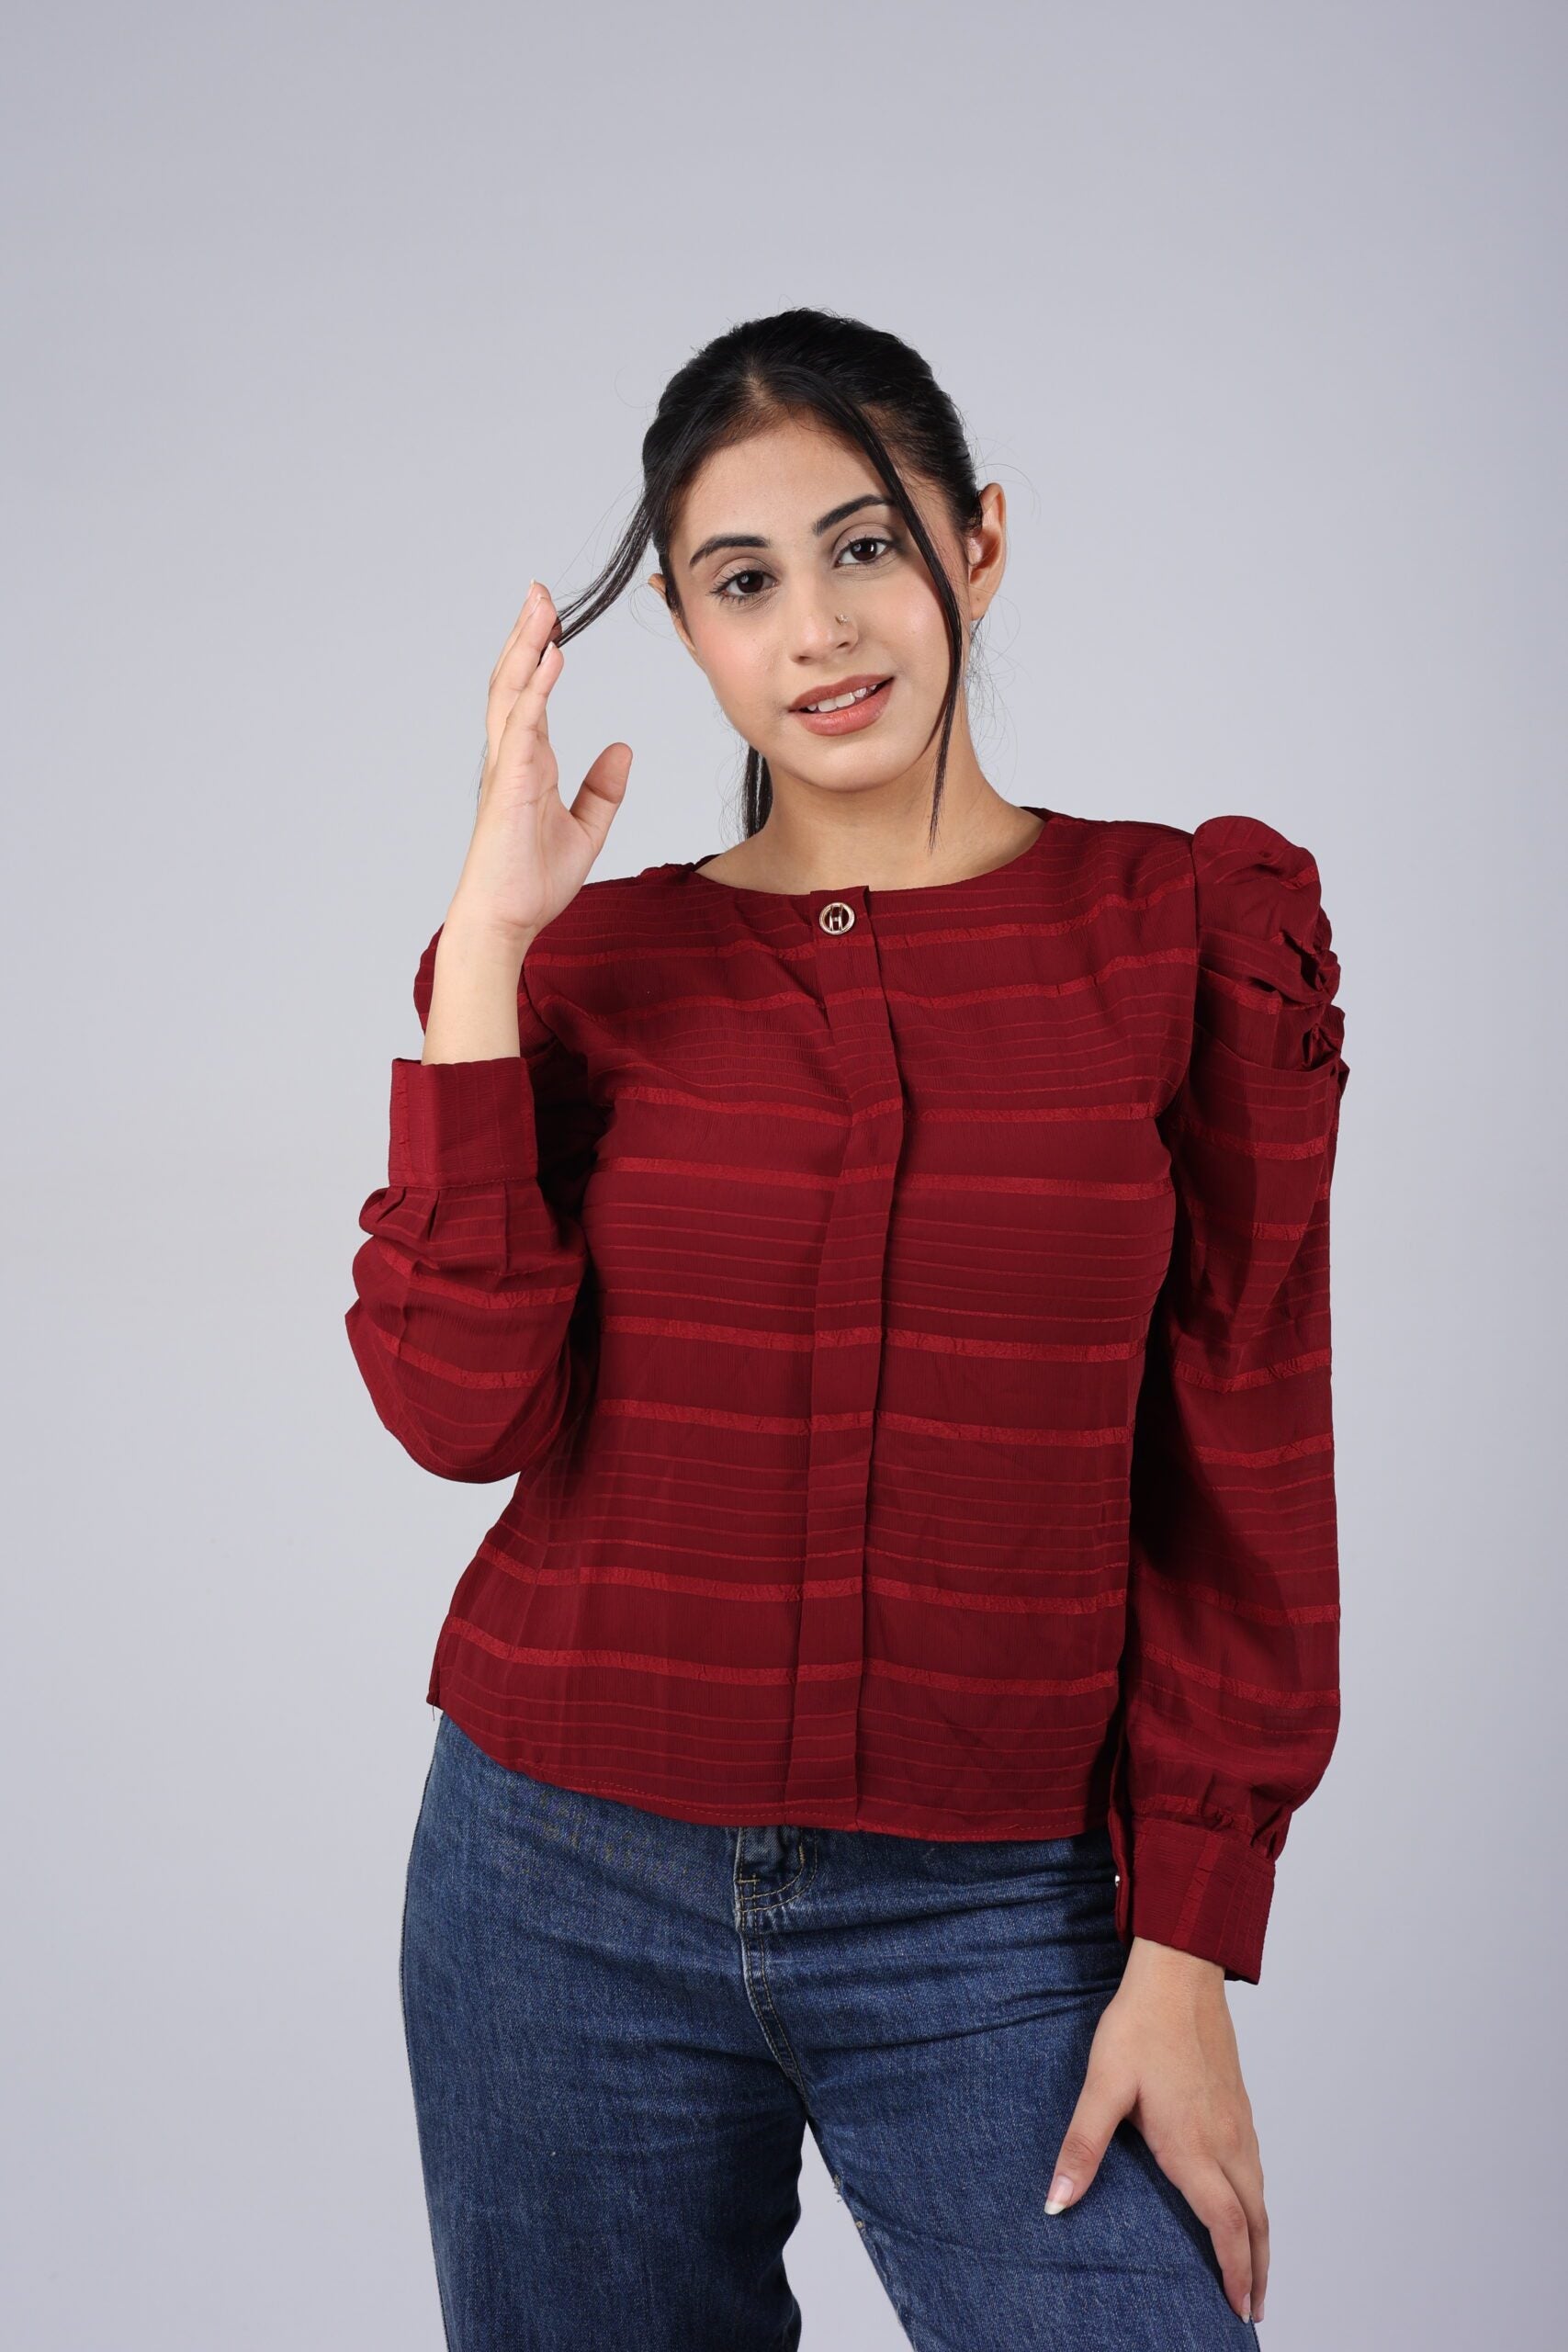 Puff Sleeve Chiffon Top (Red) A Stunning and Elegant Addition to Your Wardrobe!